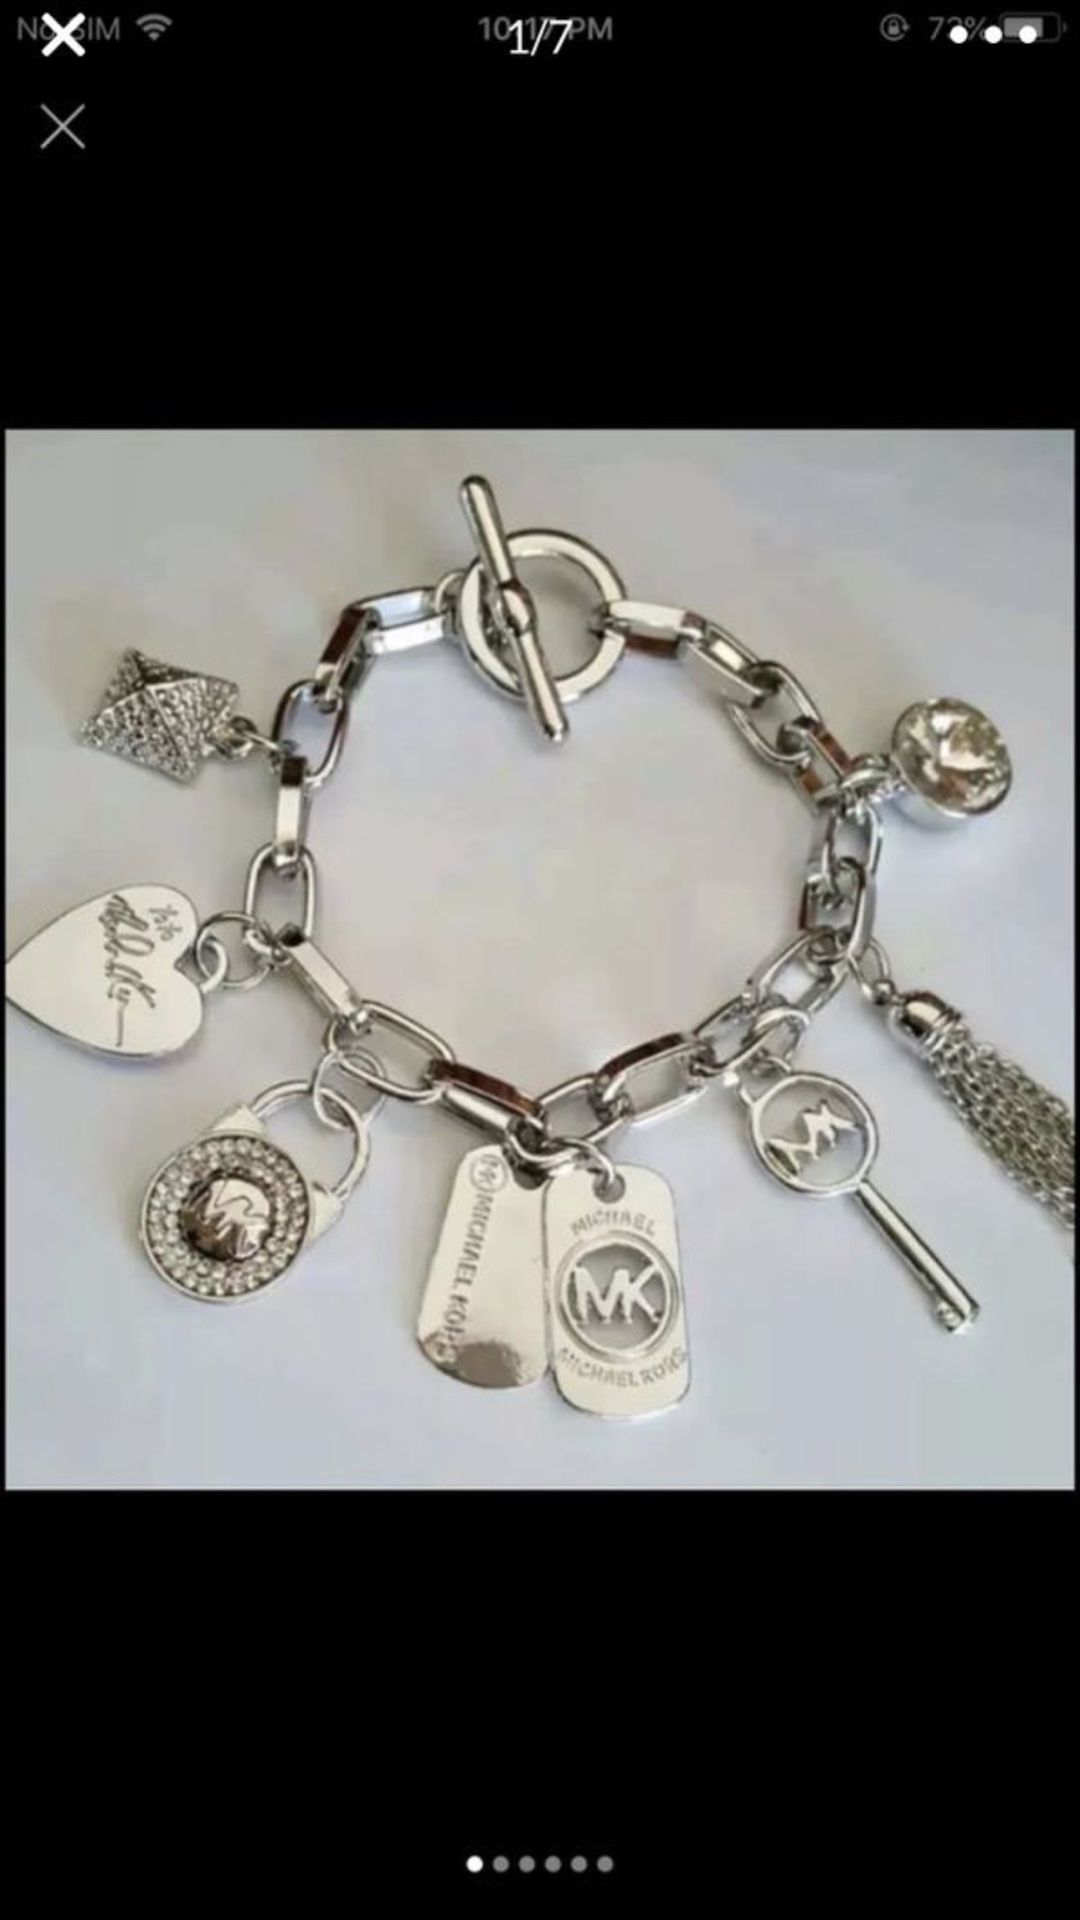 Mk Michael kors bracelets charms bangle jewelry accessory size 7.5” and 8.5” available